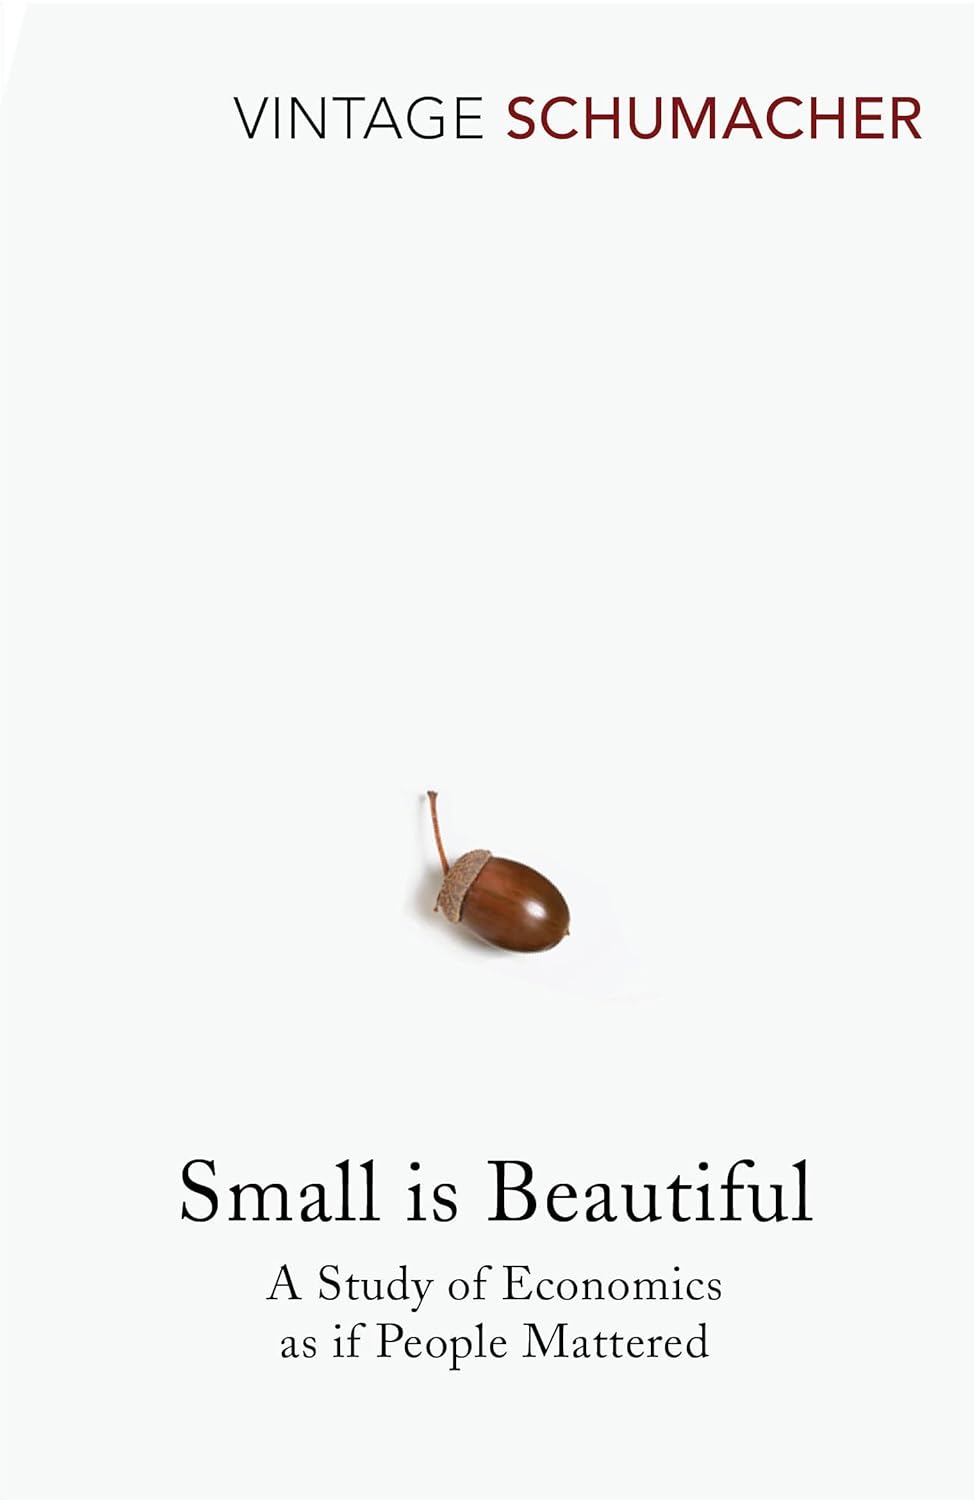 Small is Beautiful: A Study of Economics as if People Mattered